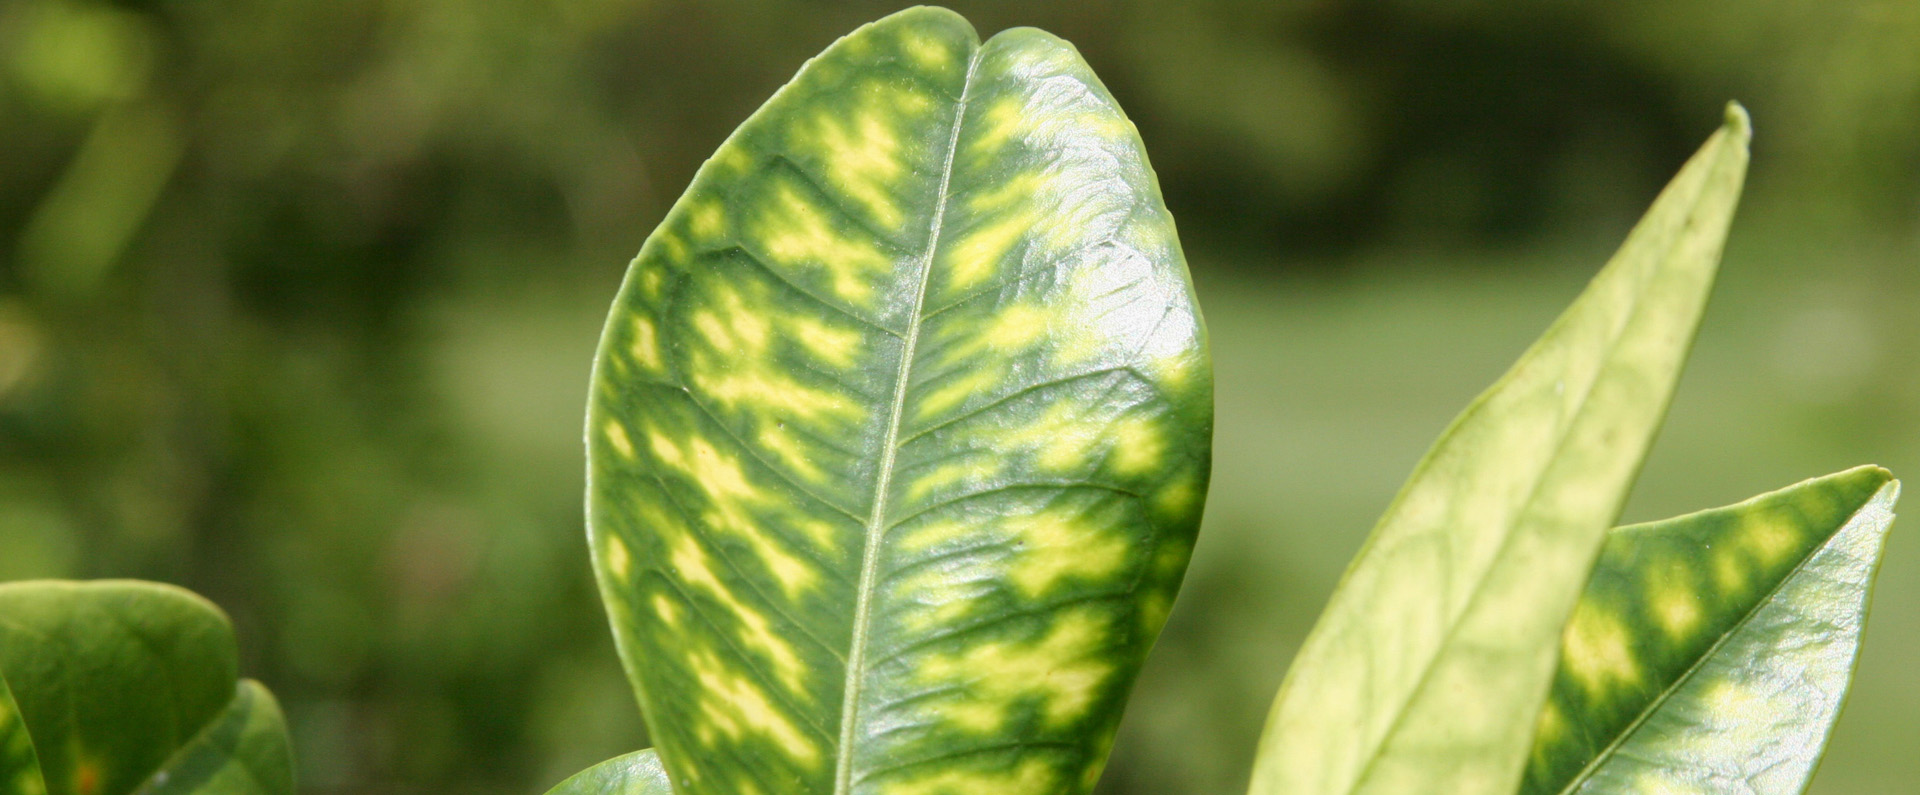 citrus leaf with yellow spots